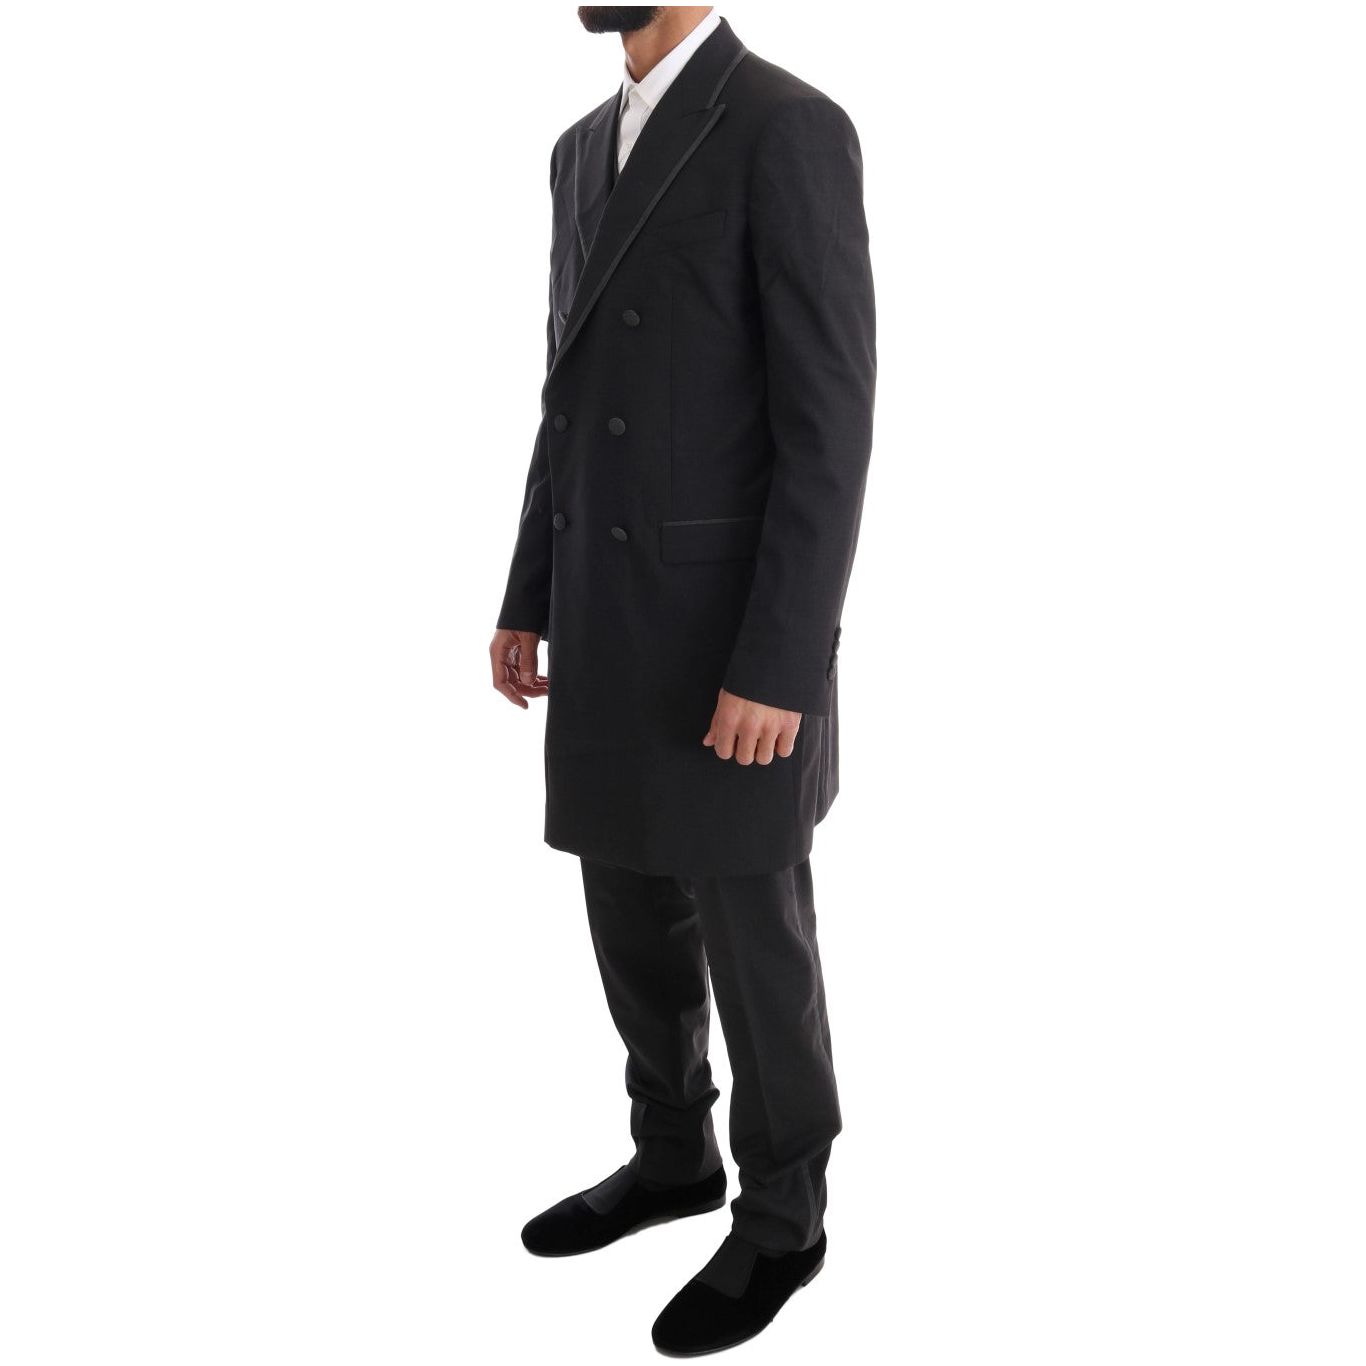 Dolce & Gabbana Elegant Gray Double Breasted Wool Suit gray-wool-stretch-3-piece-two-button-suit-1 Suit